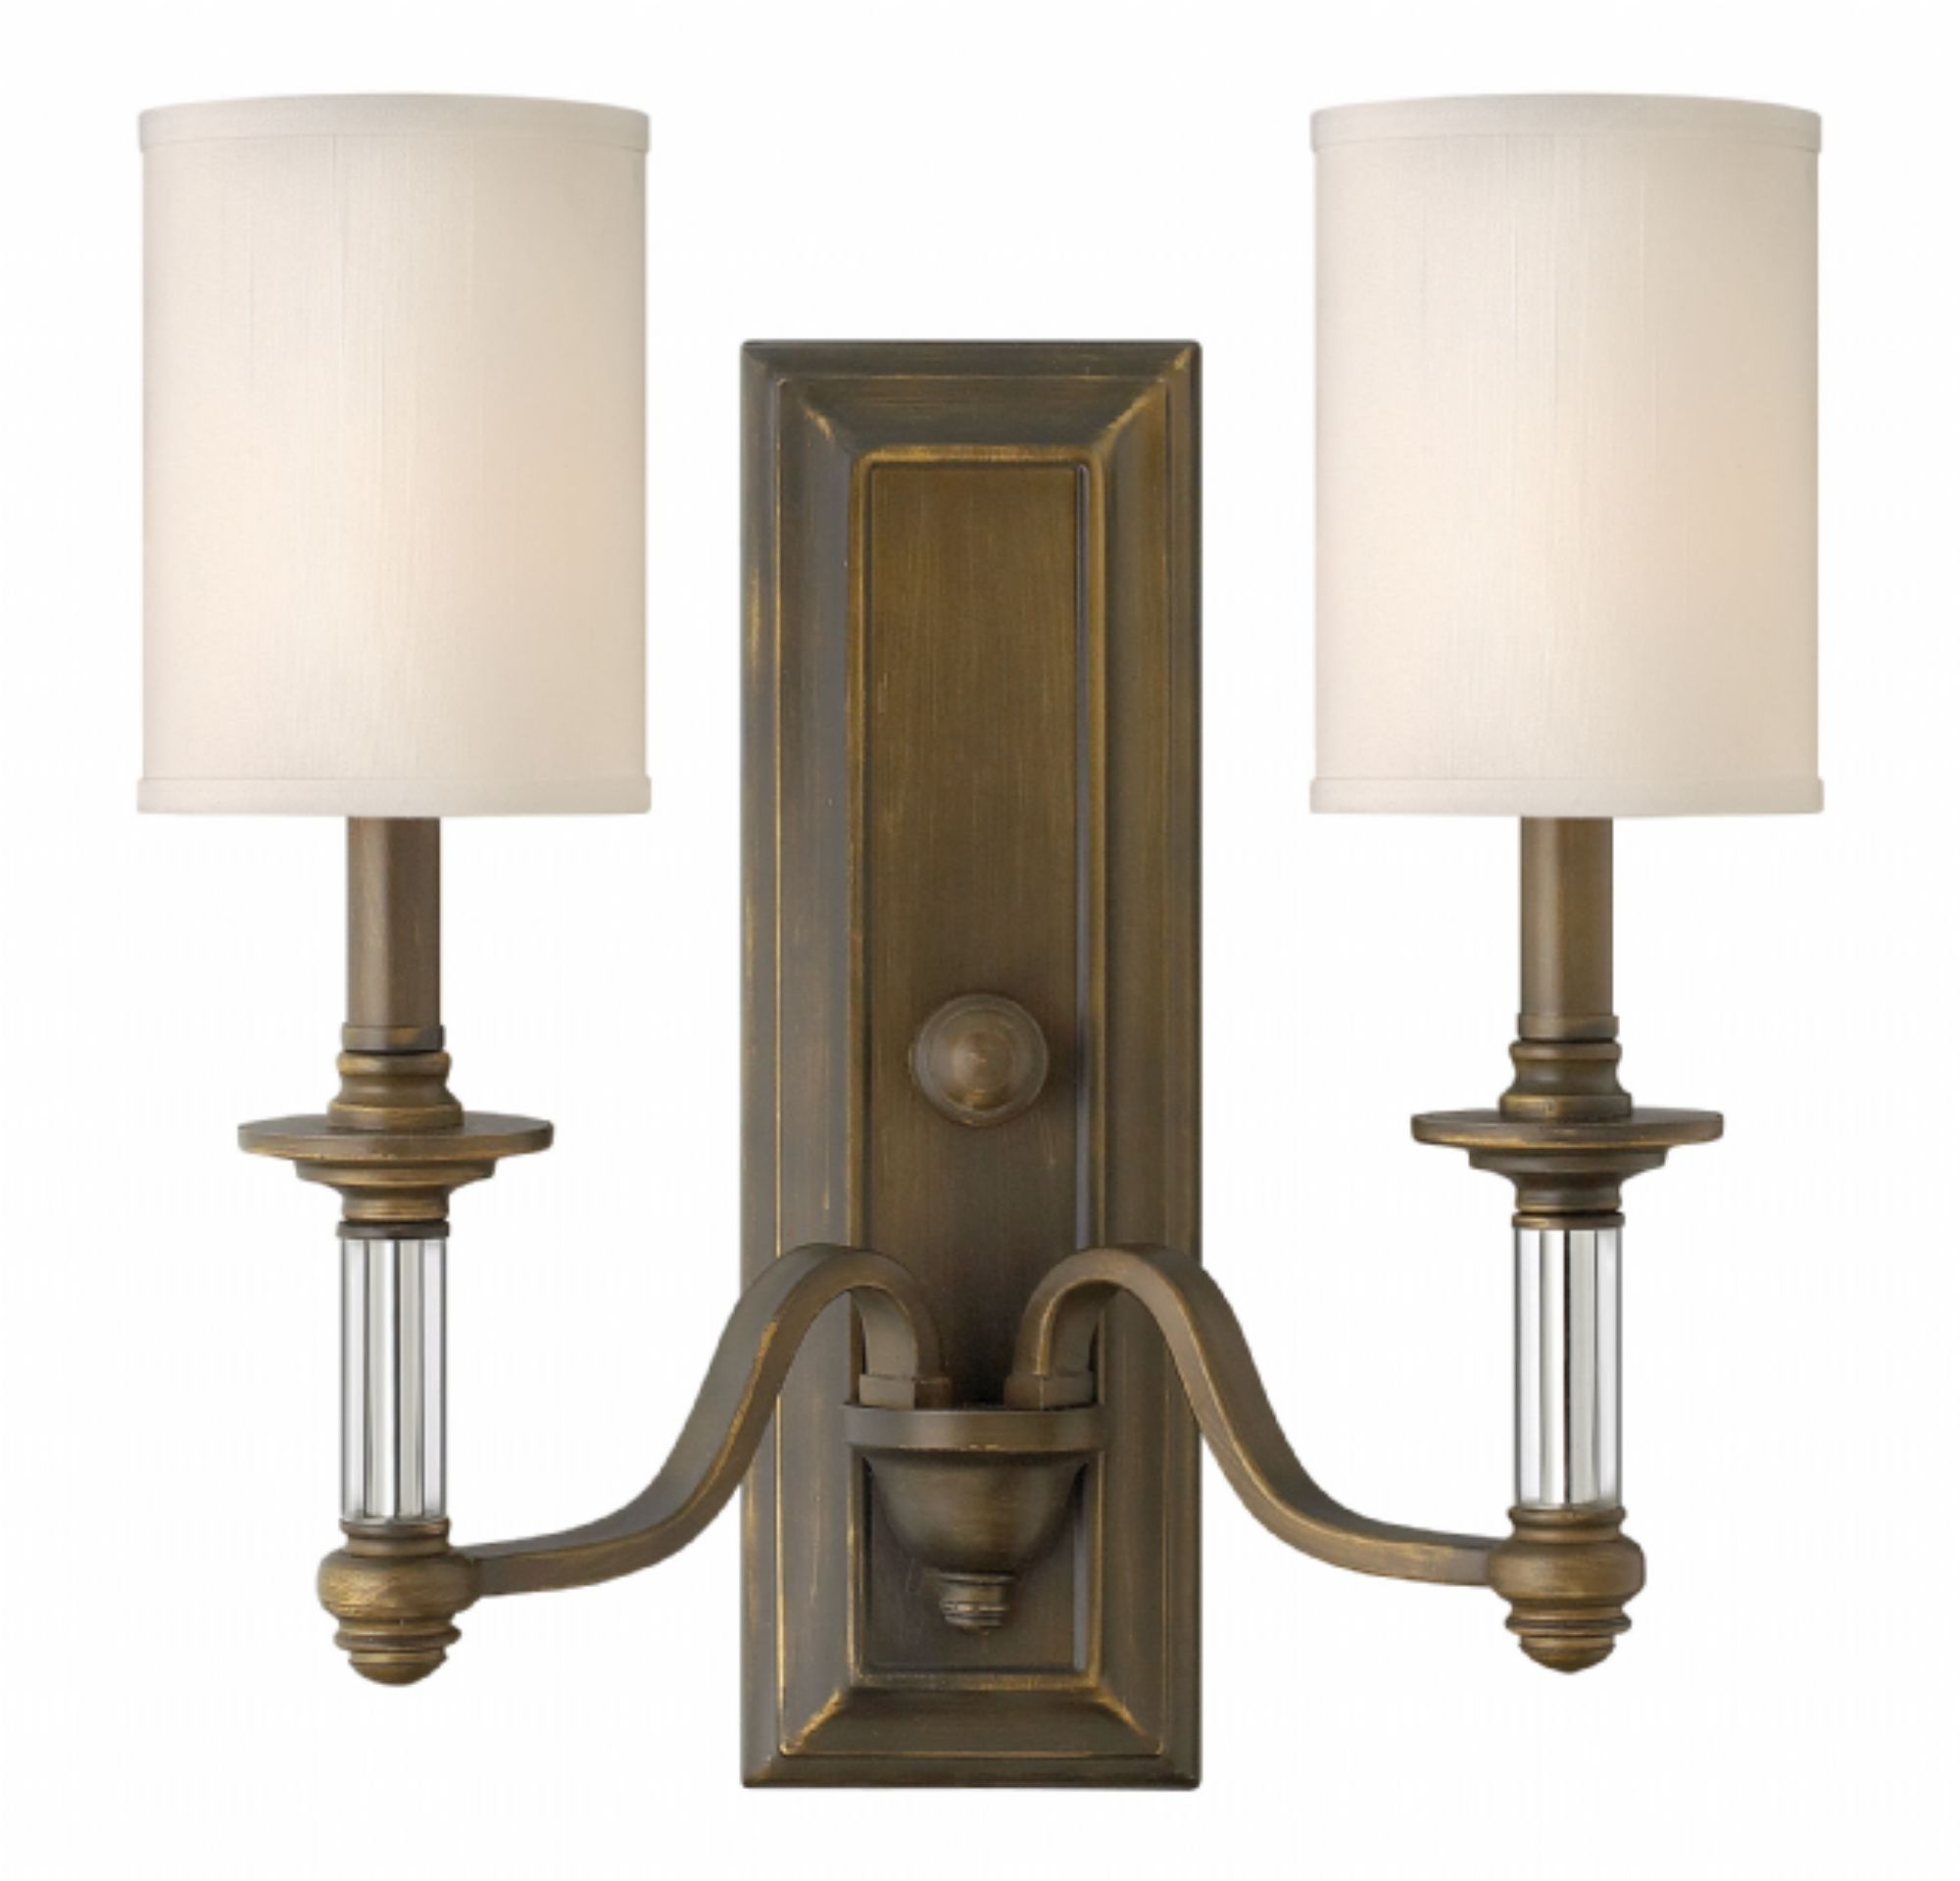 English Bronze Sussex > Interior Wall Mount With Regard To Double Wall Mount Hinkley Lighting (View 4 of 15)